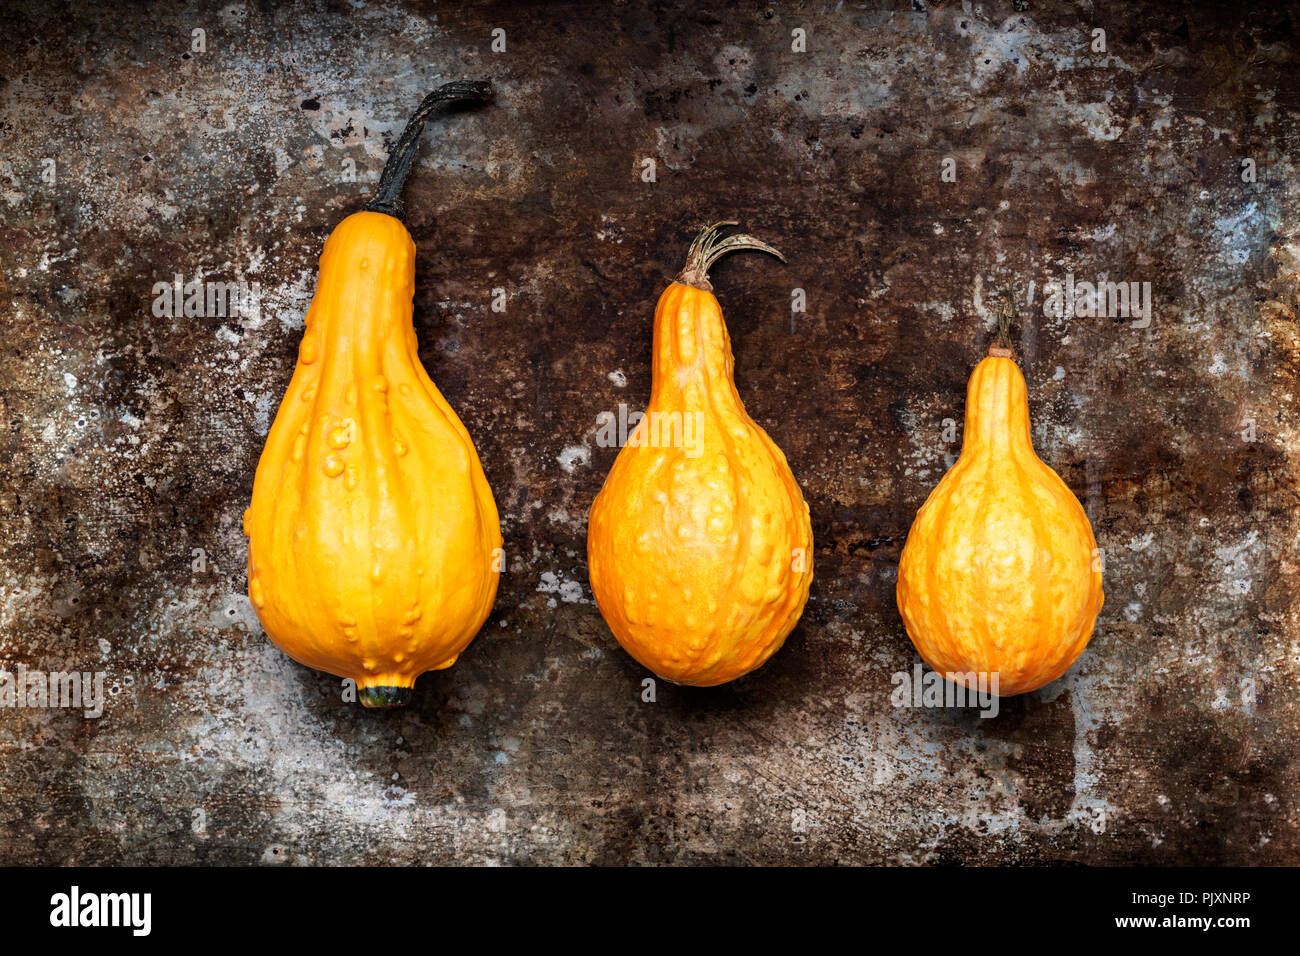 Happy Thanksgiving Background. Three orange pumpkins on rustic metal background with copy space. Autumn Harvest and Holiday minimal still life. Stock Photo